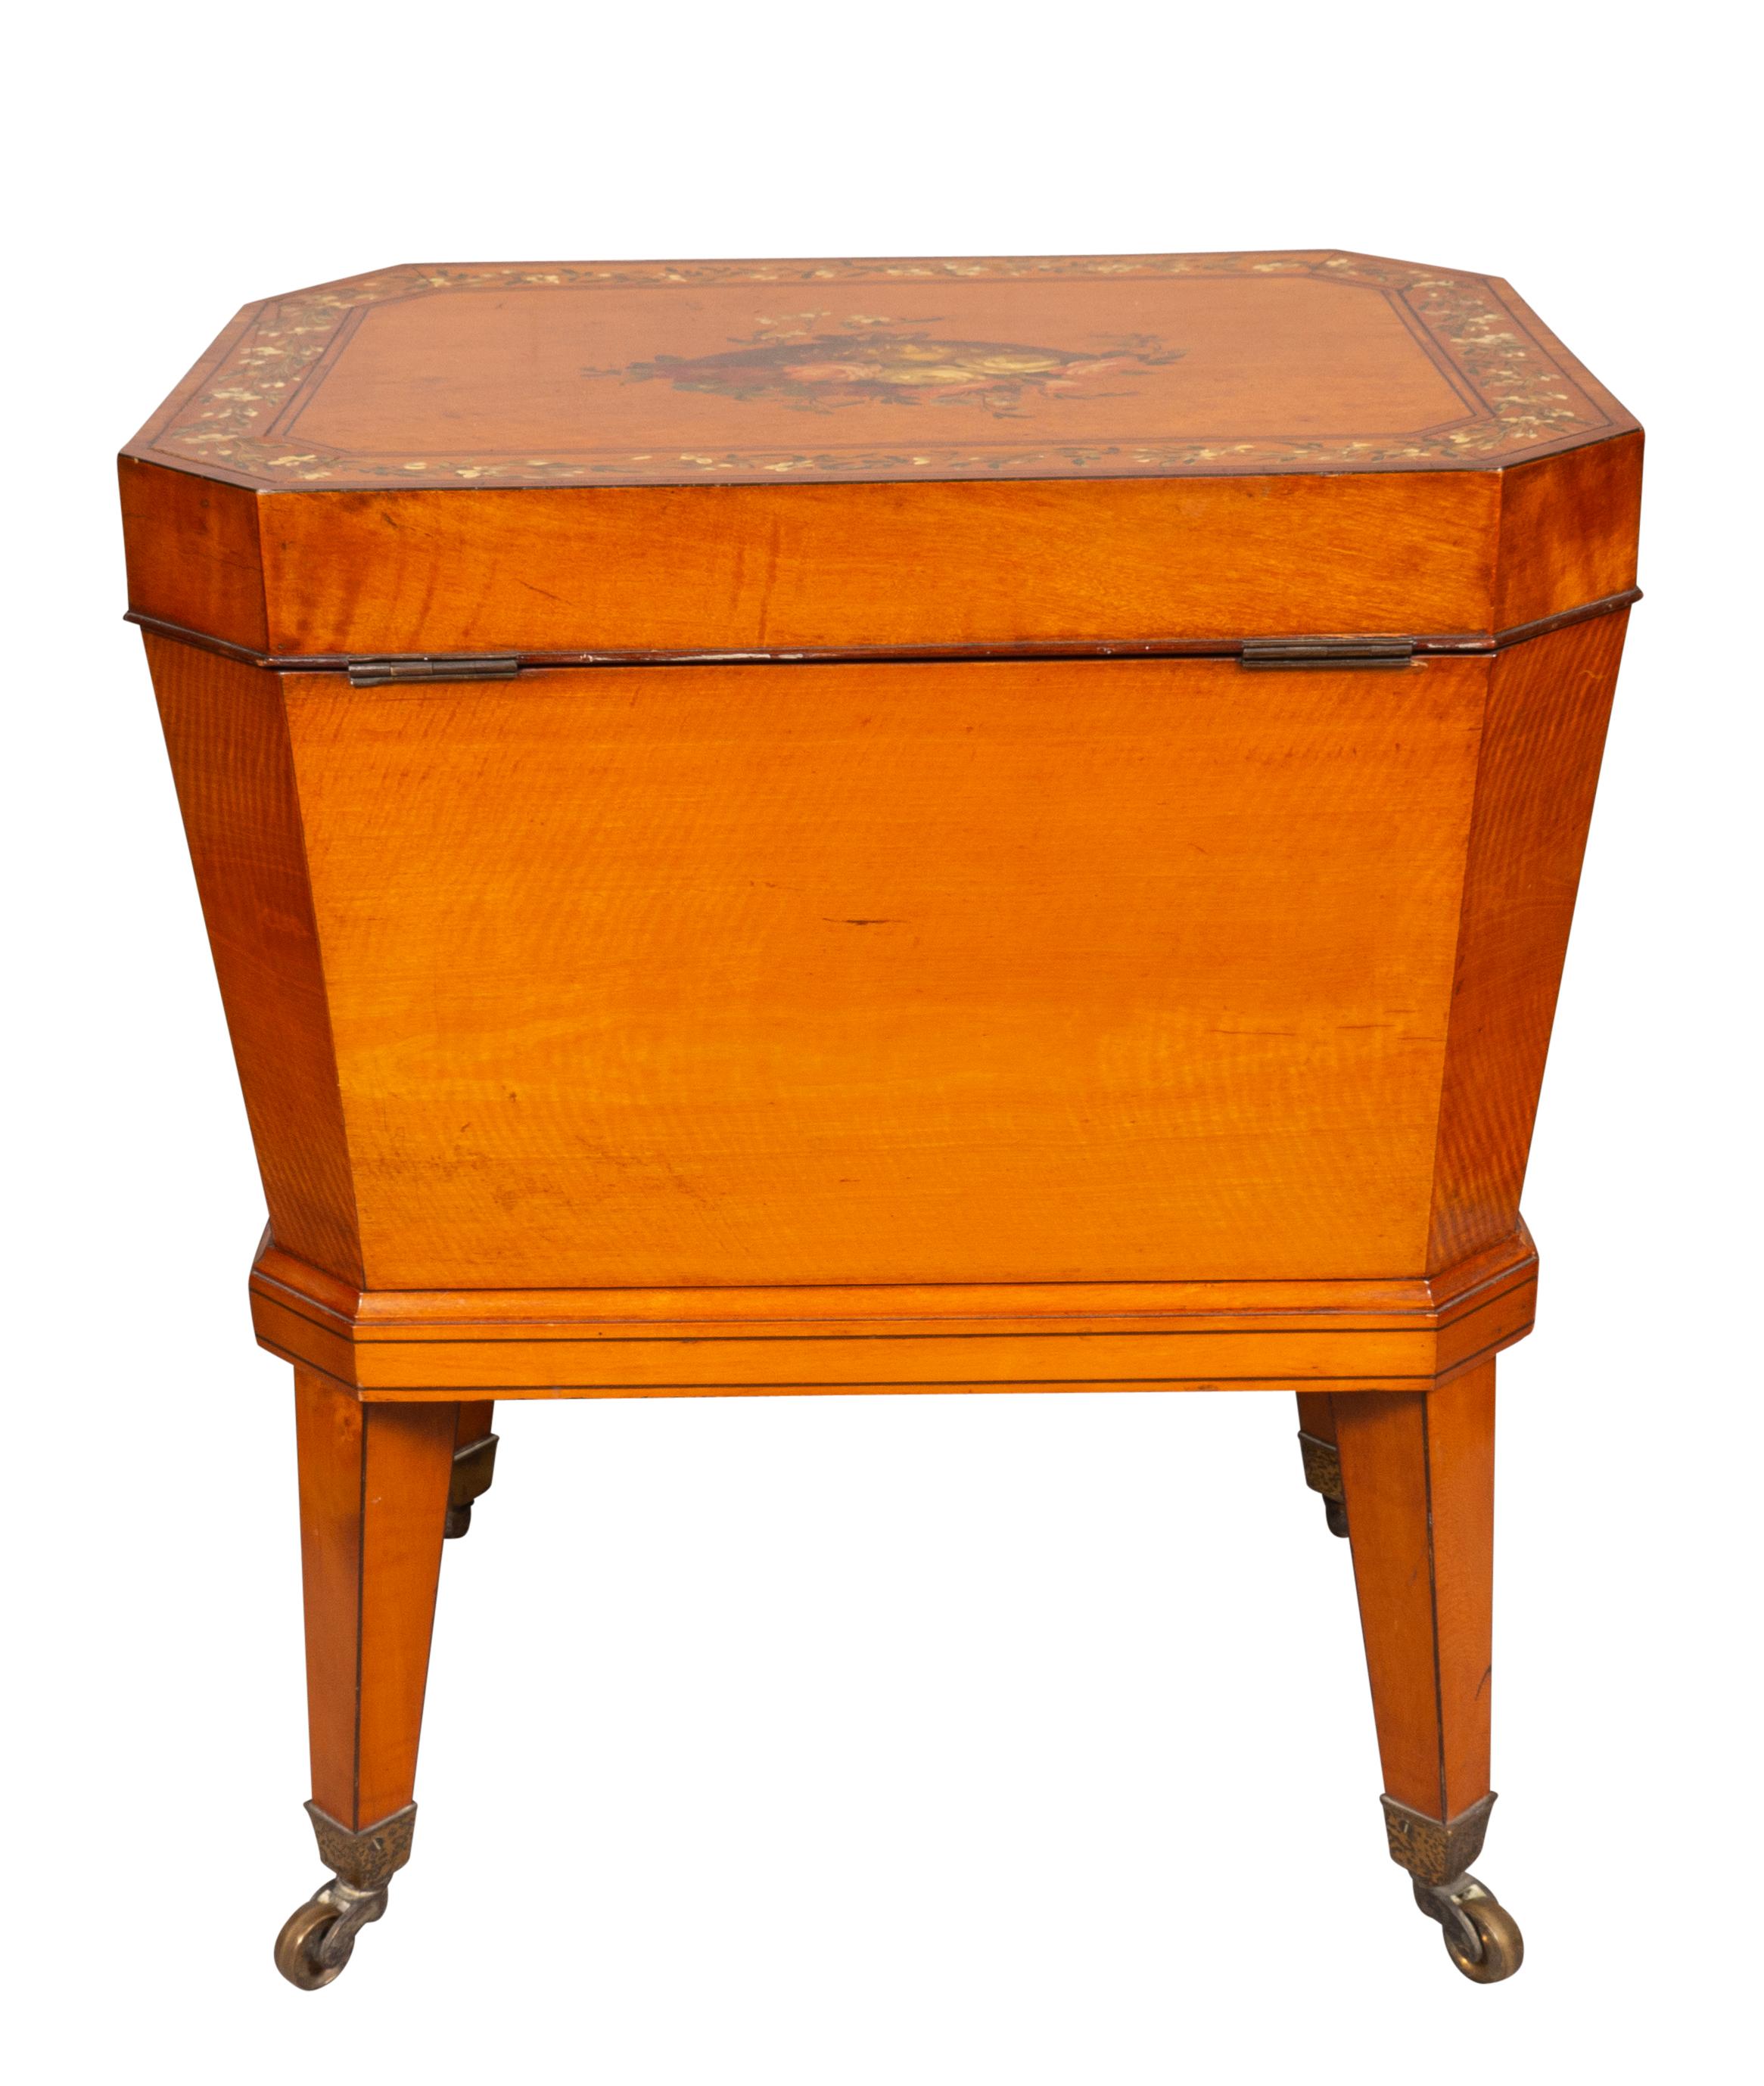 English Edwardian Satinwood And Painted Wine Cooler For Sale